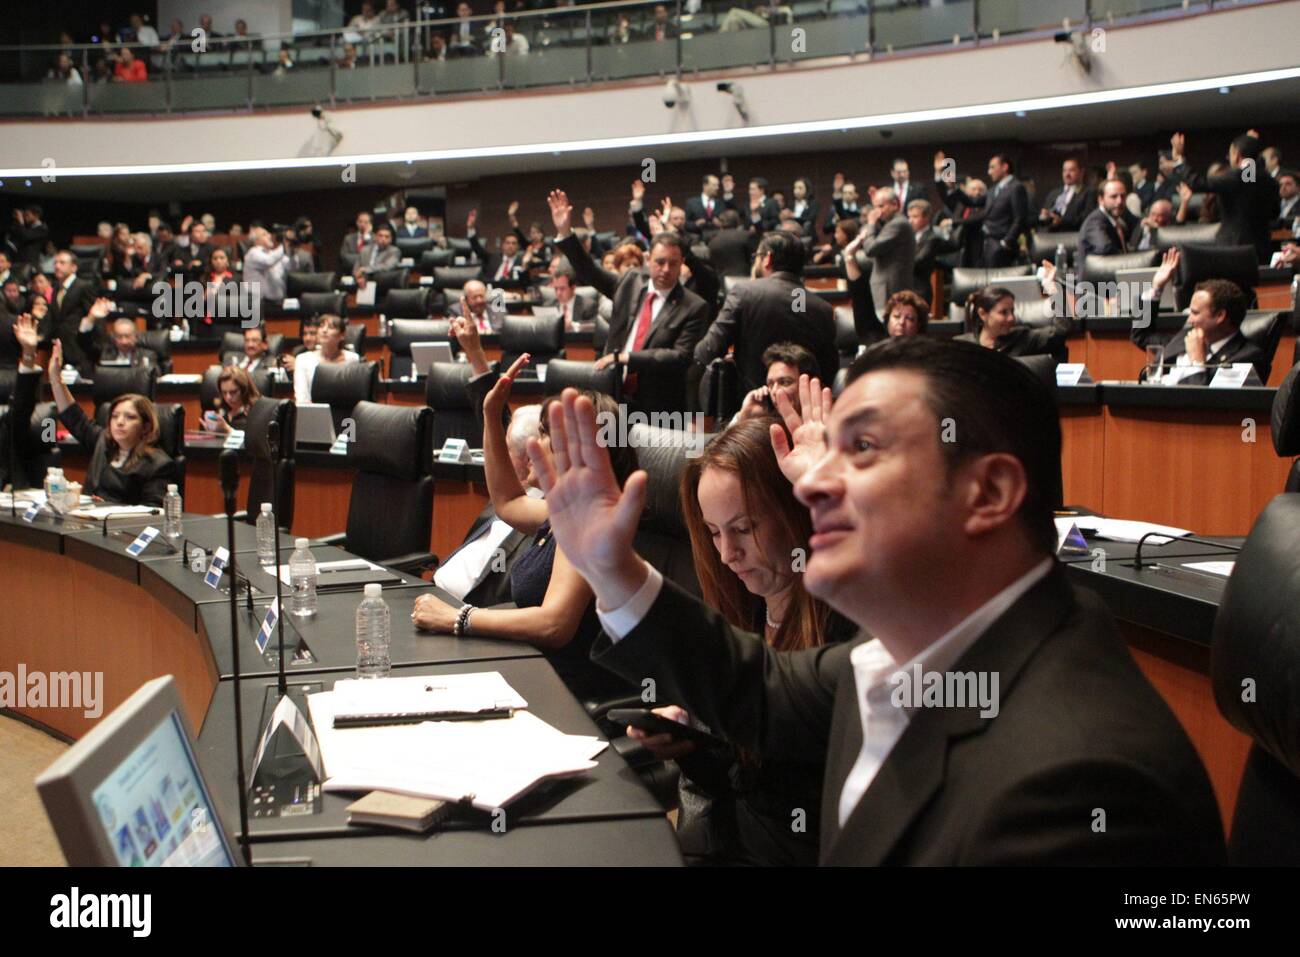 Mexico City, Mexico. 28th Apr, 2015. Senators take part in the vote of the political reform of the Federal District at the headquarters of the Republic's Senate, in Mexico City, capital of Mexico, on April 28, 2015. According to local press, the Senate approved the political reform of the Federal District, which among its most important highlights is that Mexico City will be provided with a local Congress and its own Constitution. Credit:  NOTIMEX/Xinhua/Alamy Live News Stock Photo